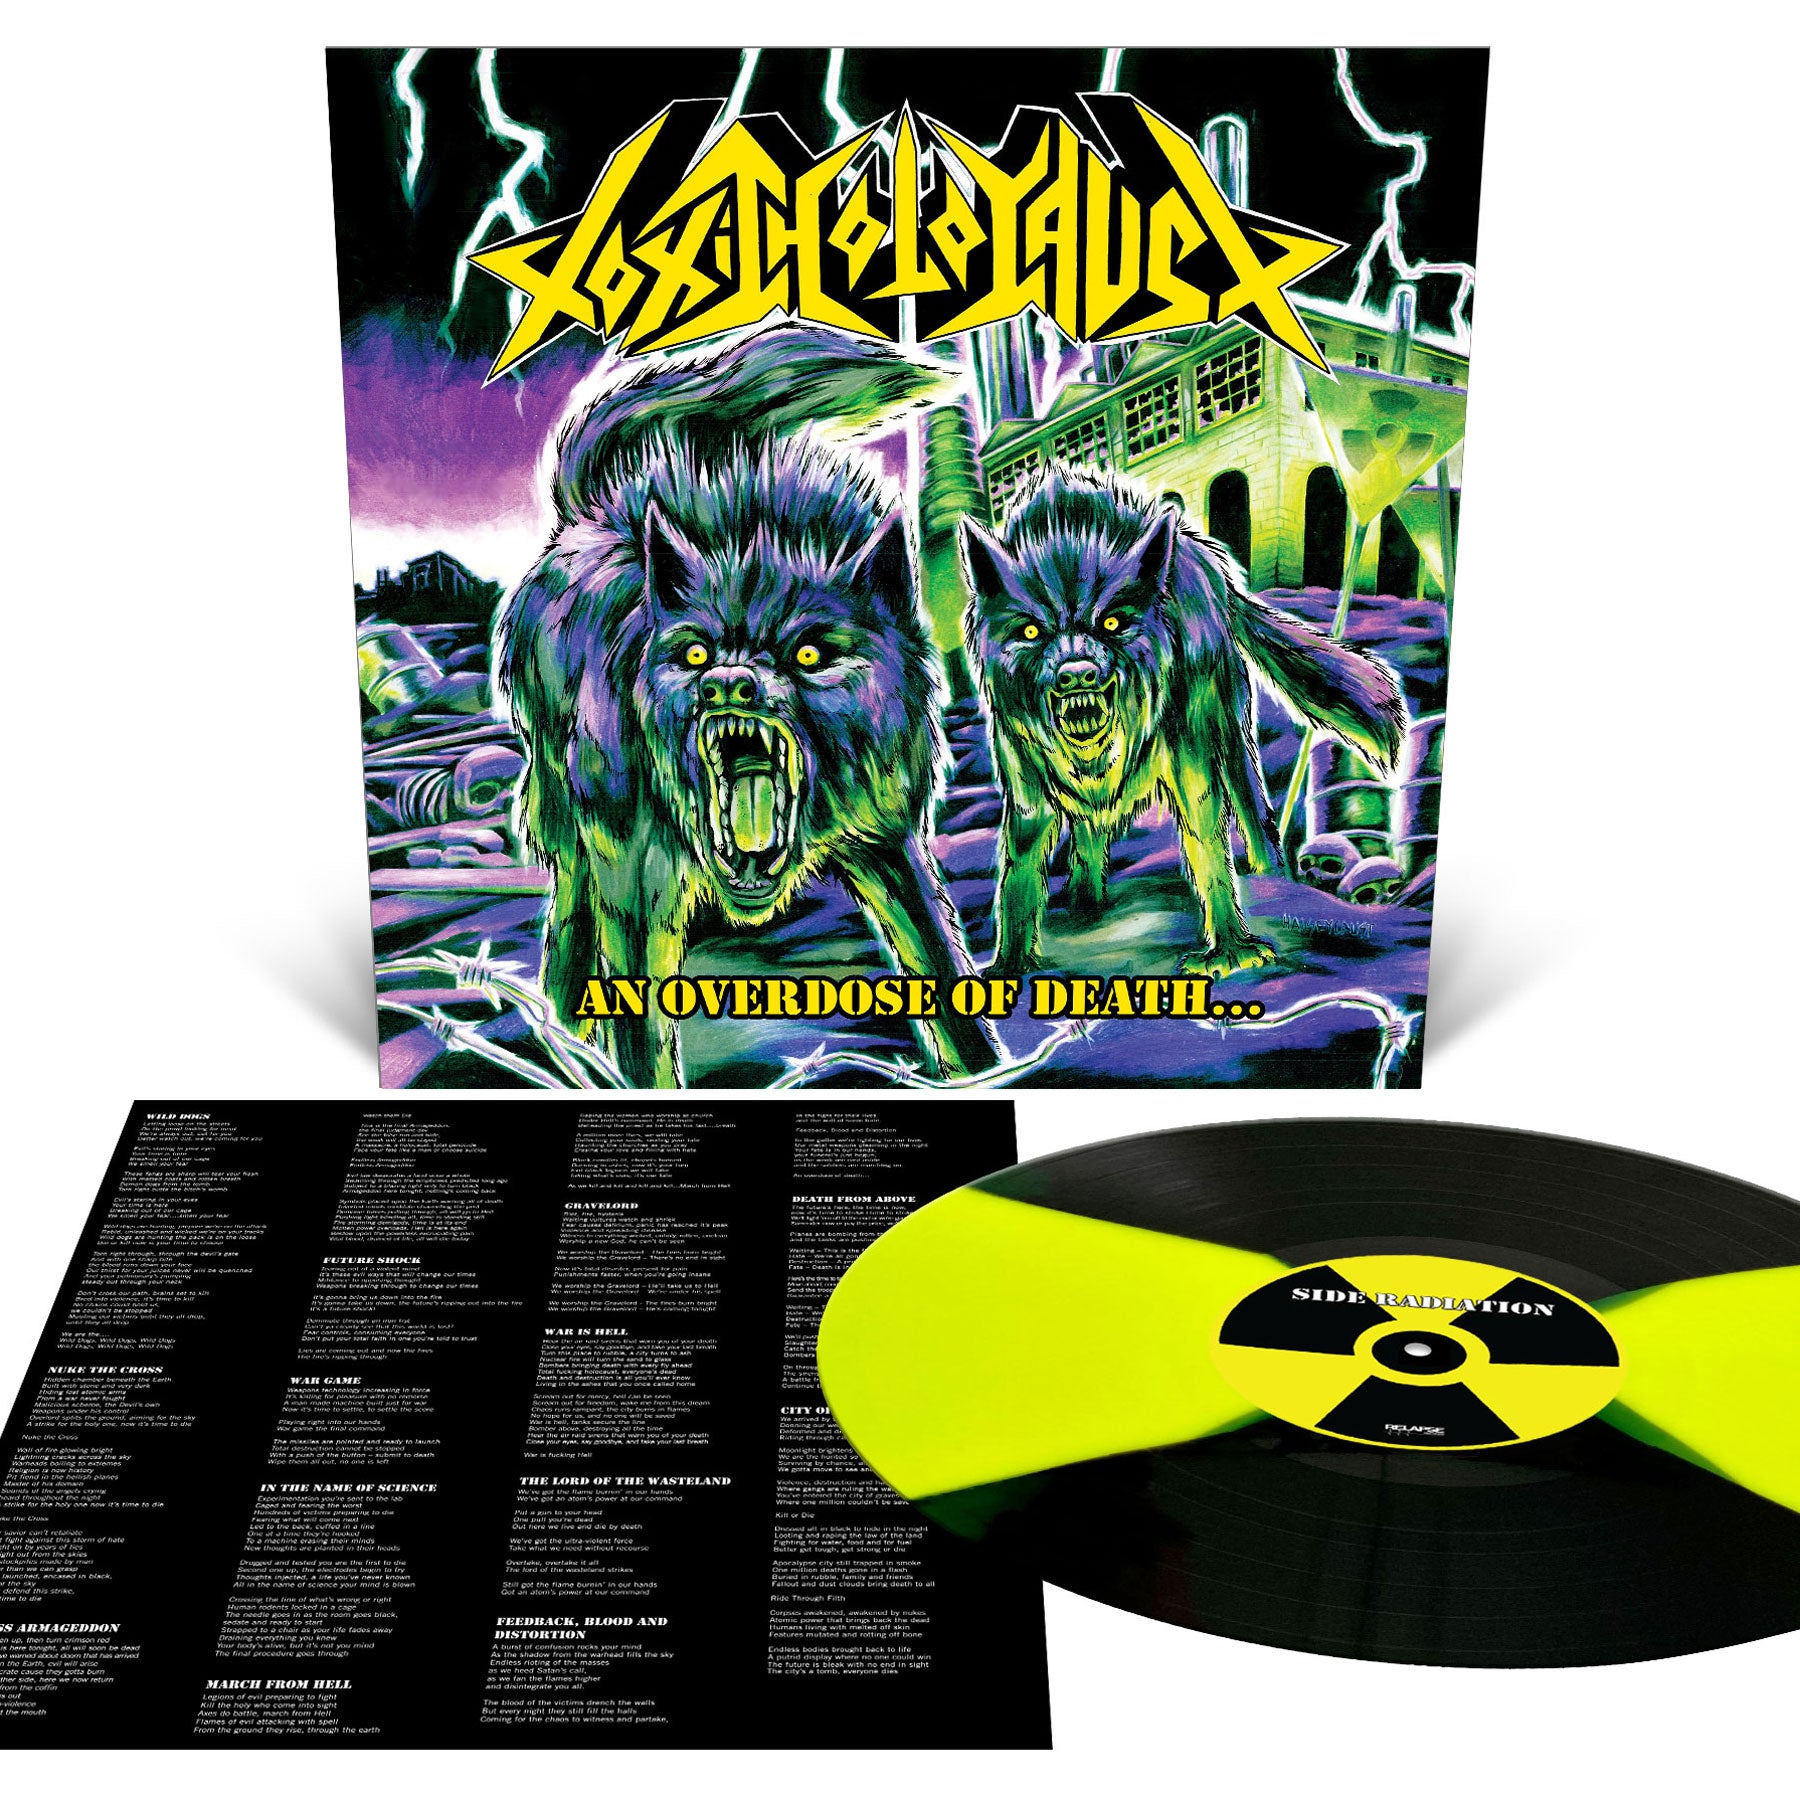 Toxic Holocaust "An Overdose of Death" 12"